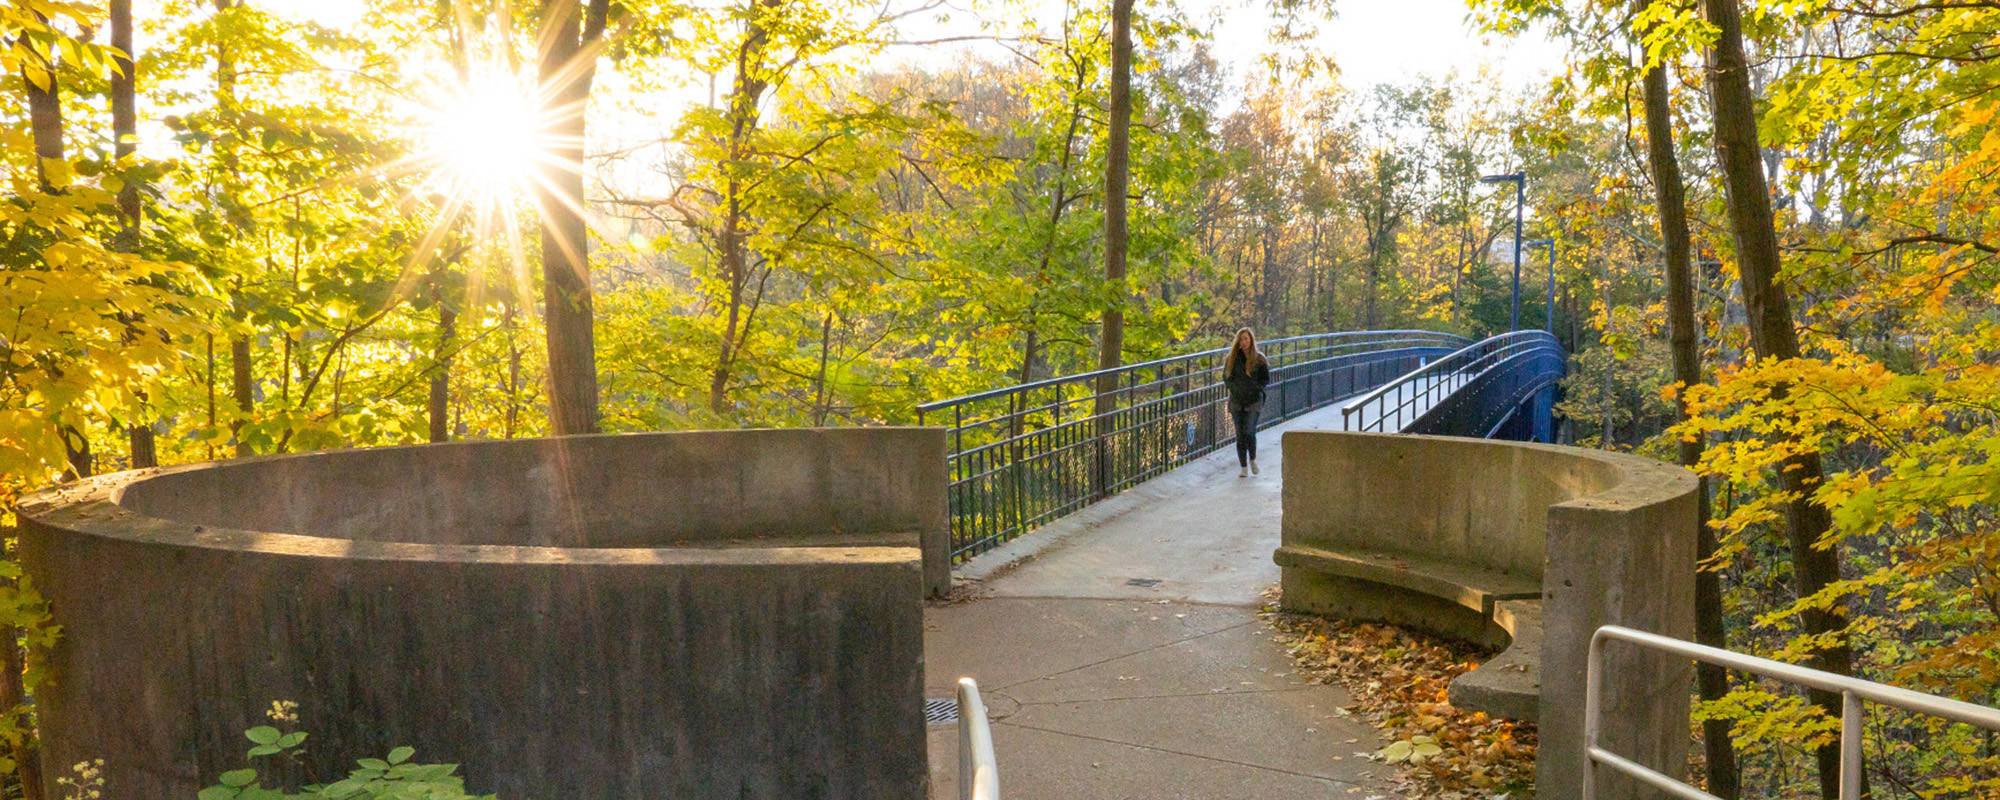 Student finding her way across the Little Mac Bridge on Grand Valley campus.